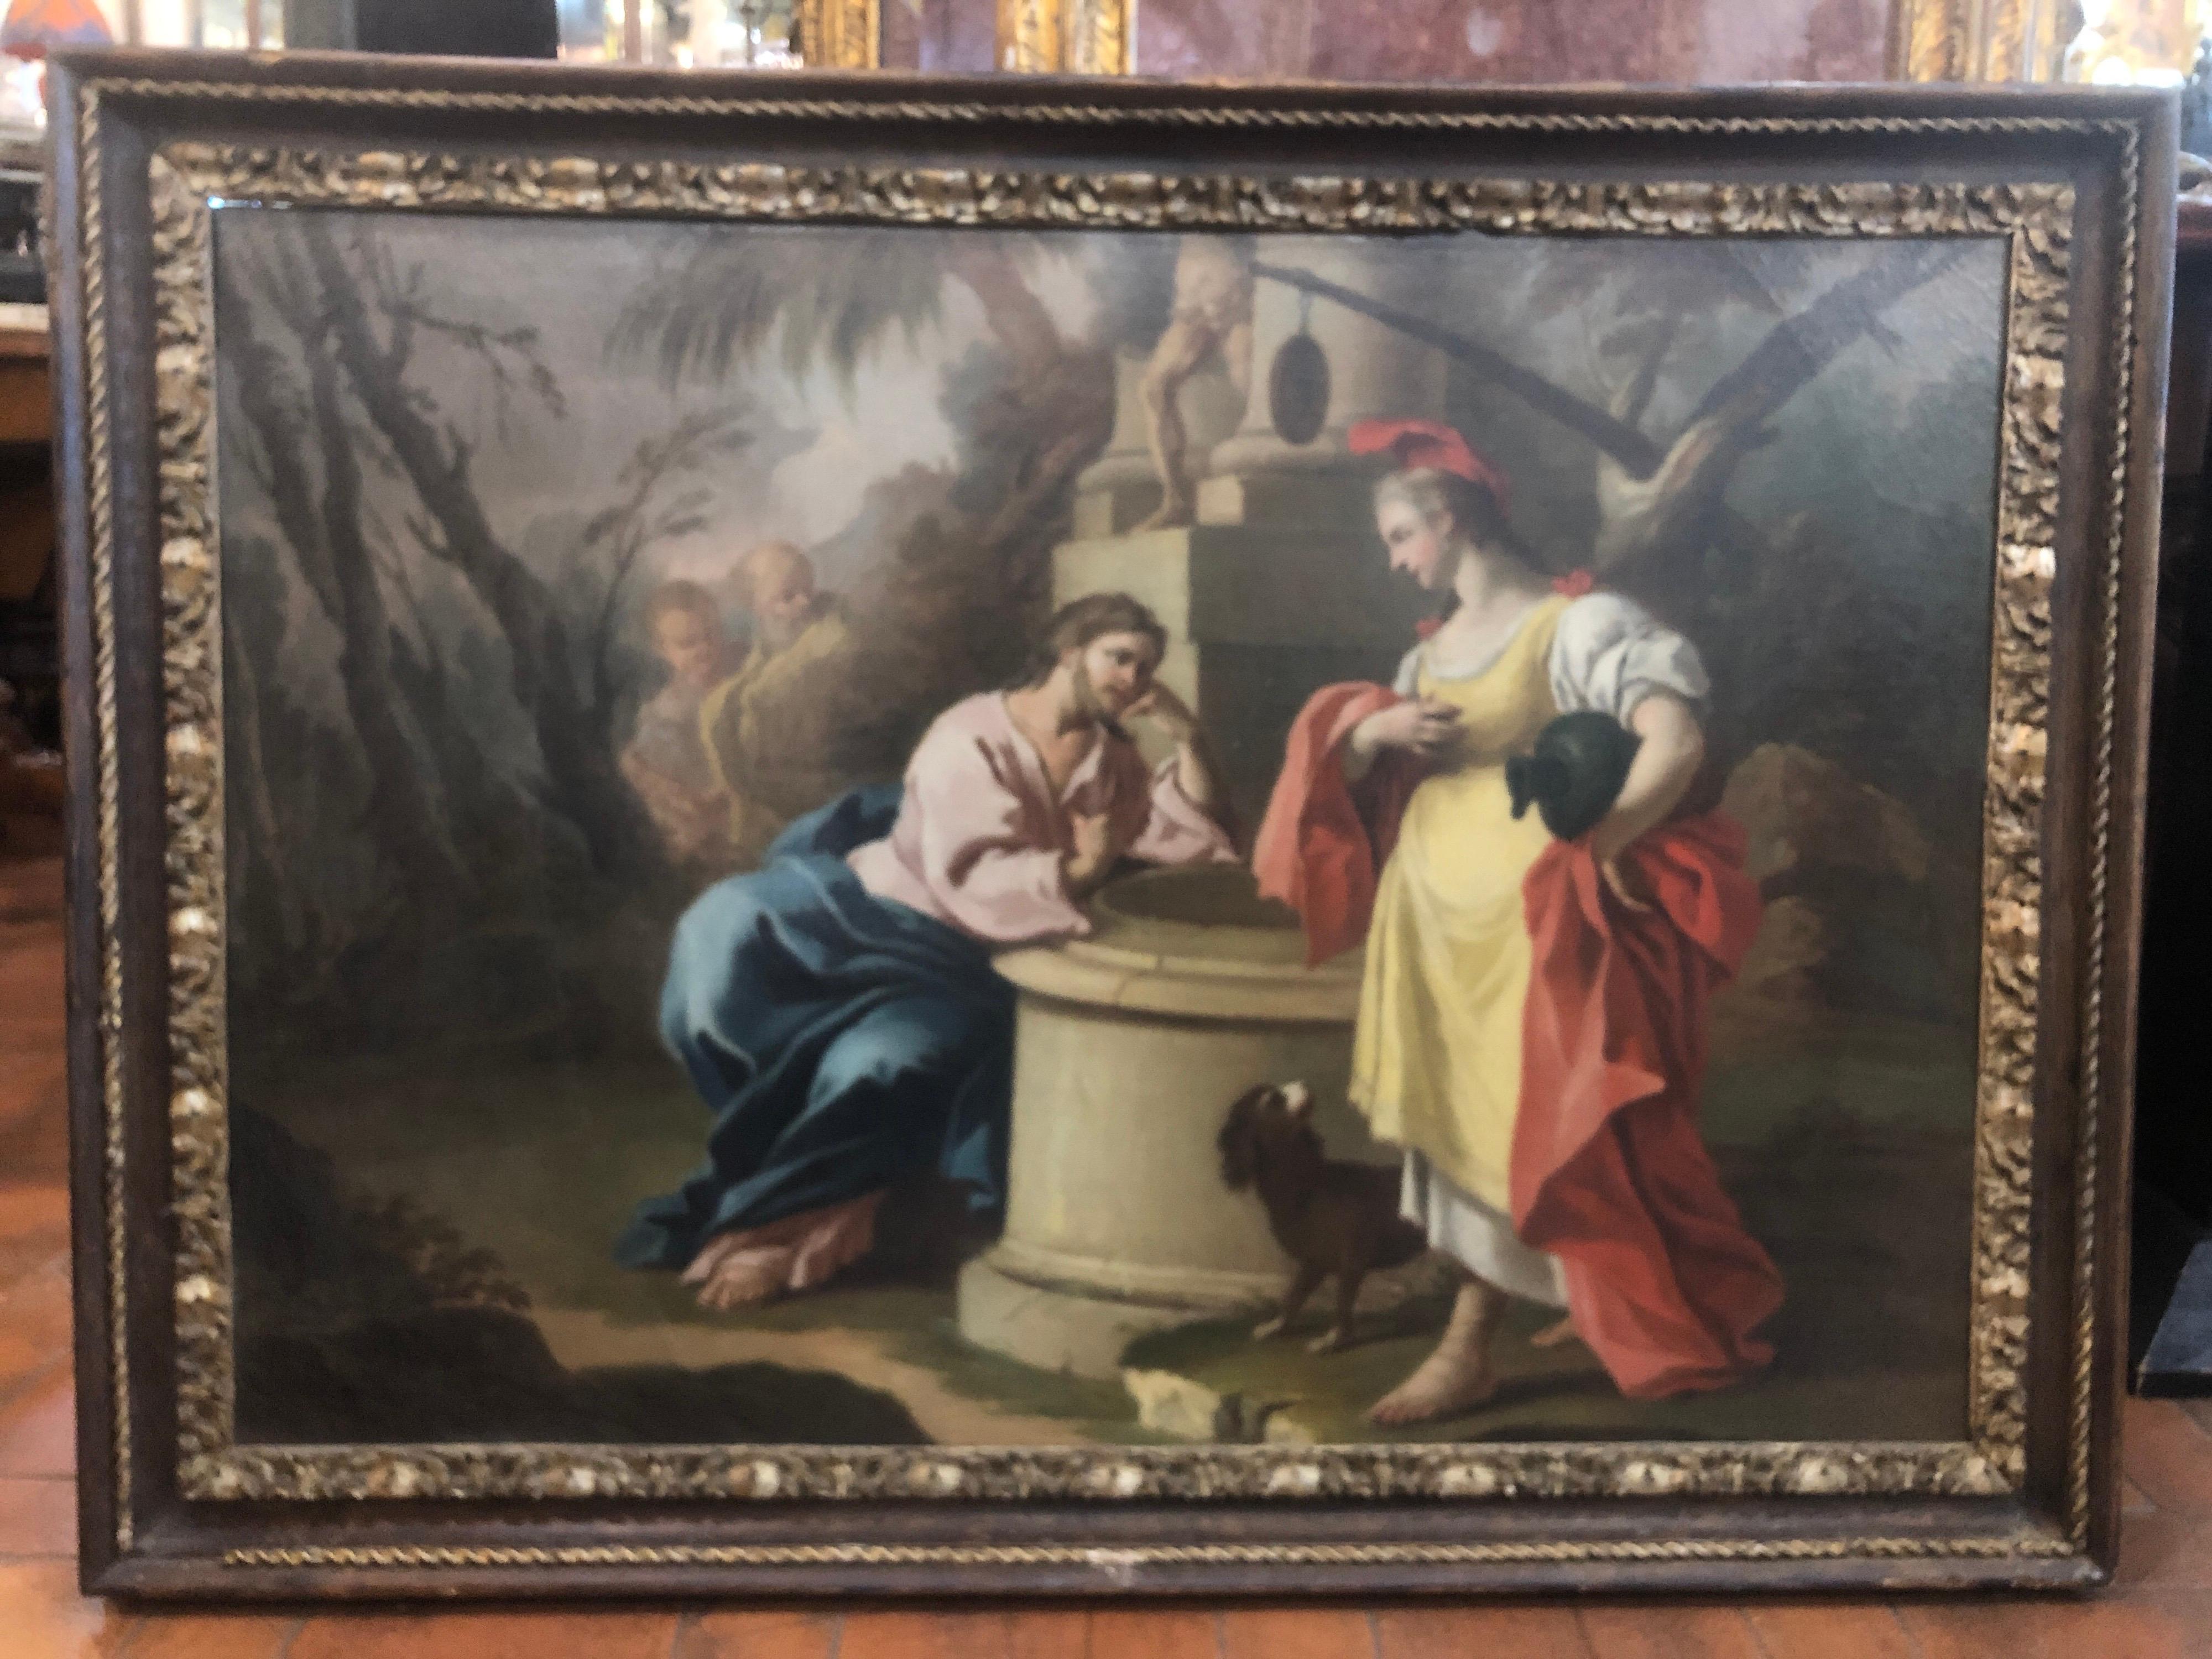 Pietro Bardellino (Naples, 1728-Naples, 1806) was an Italian painter.
Pair of works: Christ and the adulteress / Christ and the woman of Samaria.
Oil on canvas. Measures: Each 67 x 95.5 cm, frame 109 x 80 cm
Expertise: Giancarlo Sestieri,